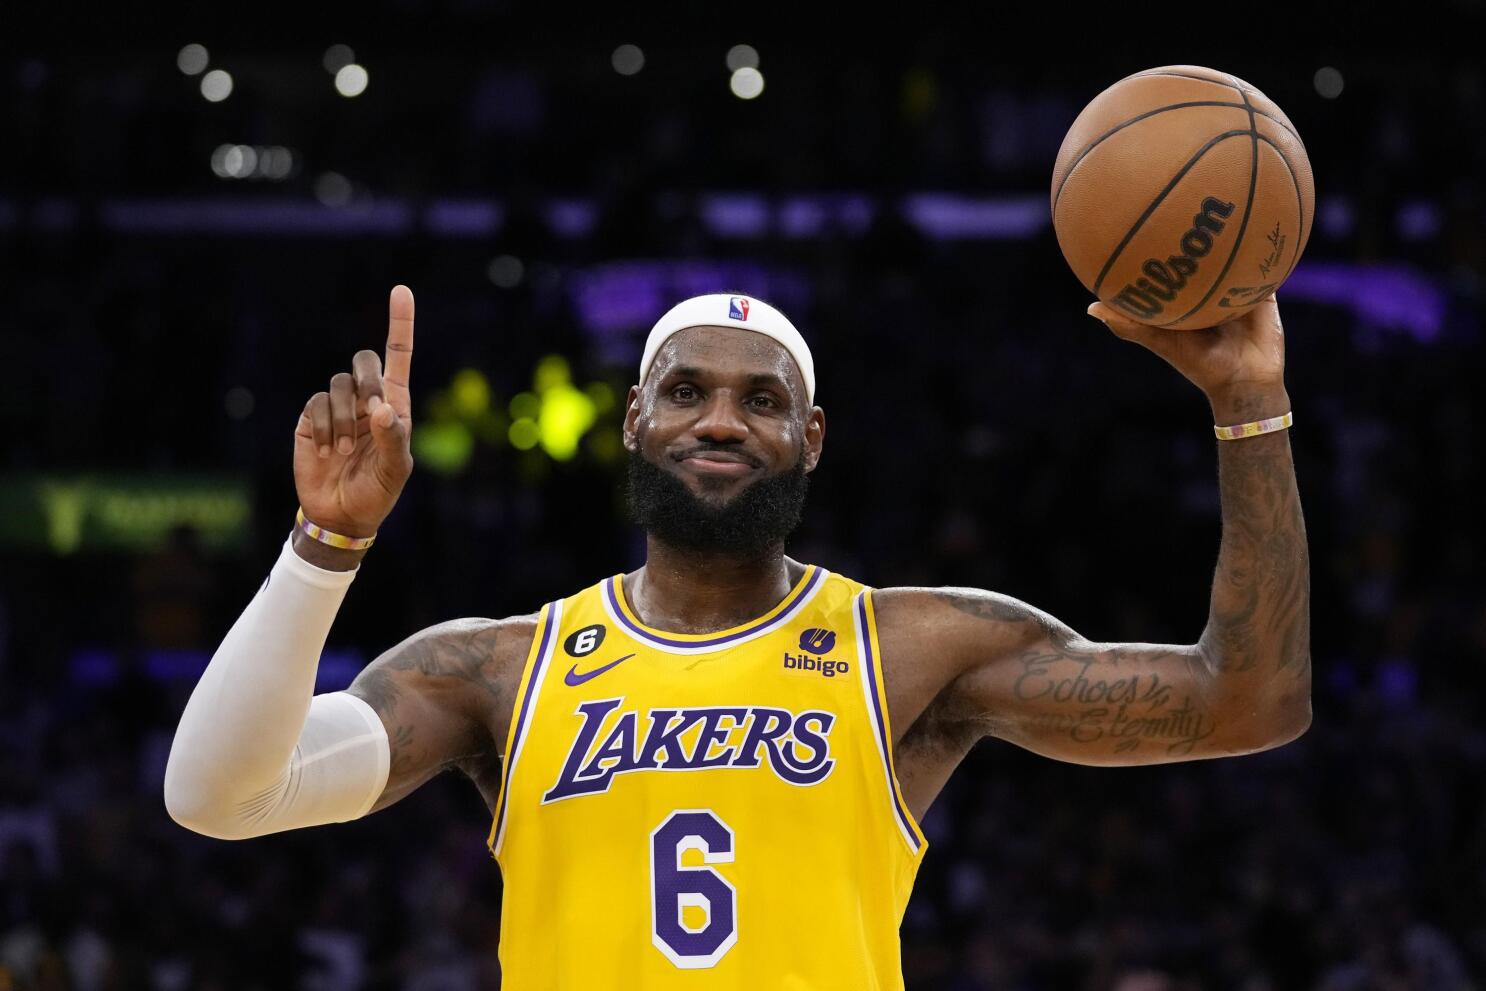 Lakers: LeBron James Responds to MLB All-Star Using His Signature  Celebration - All Lakers